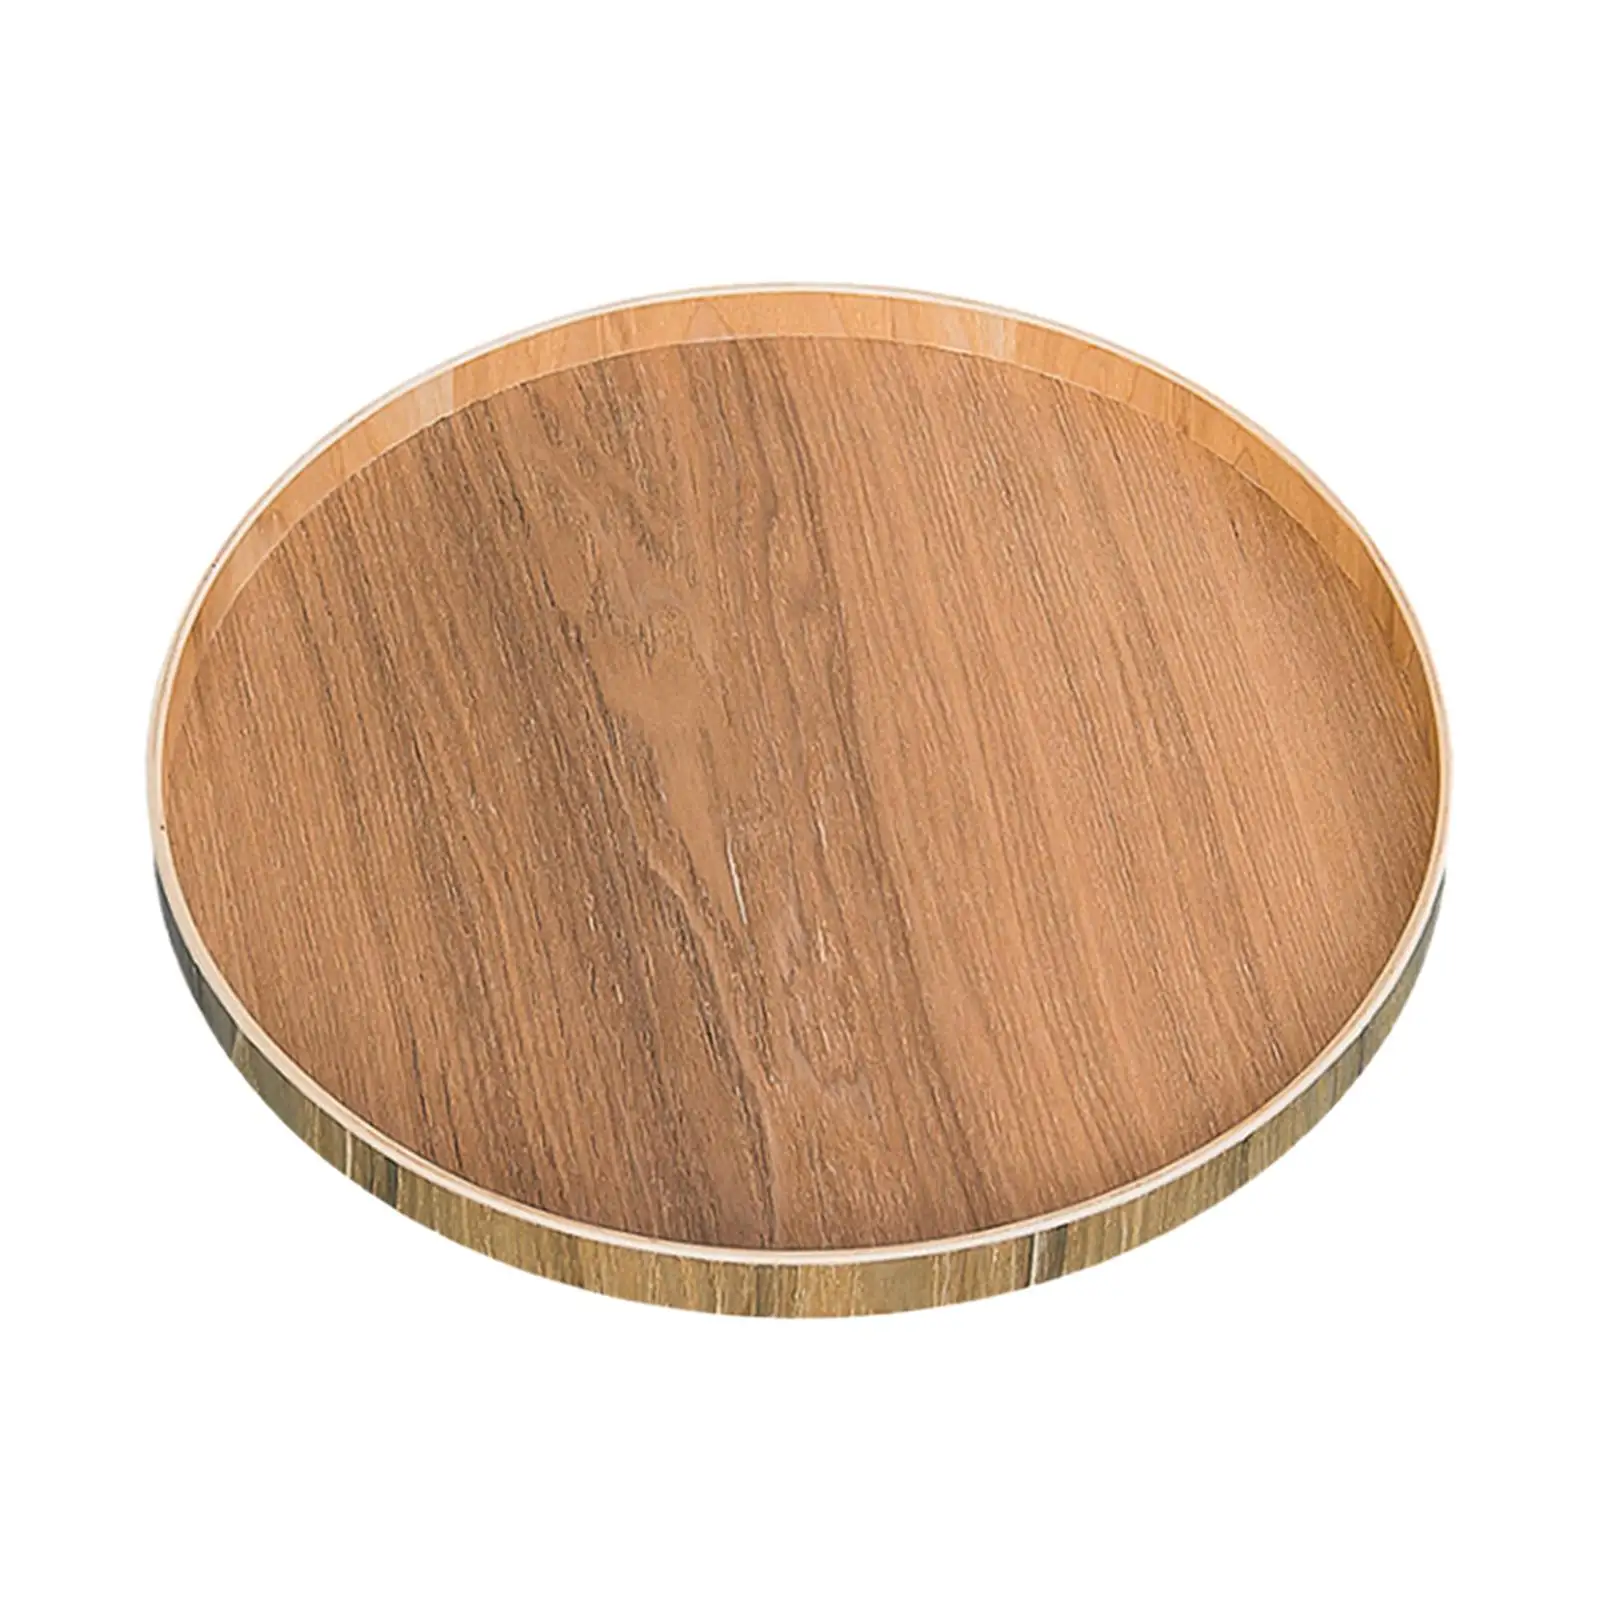 Round Serving Tray Dessert Tray Food Holder Appetizer Organizer for Home Cabinet Pantry Kitchen Countertop Table Centerpiece